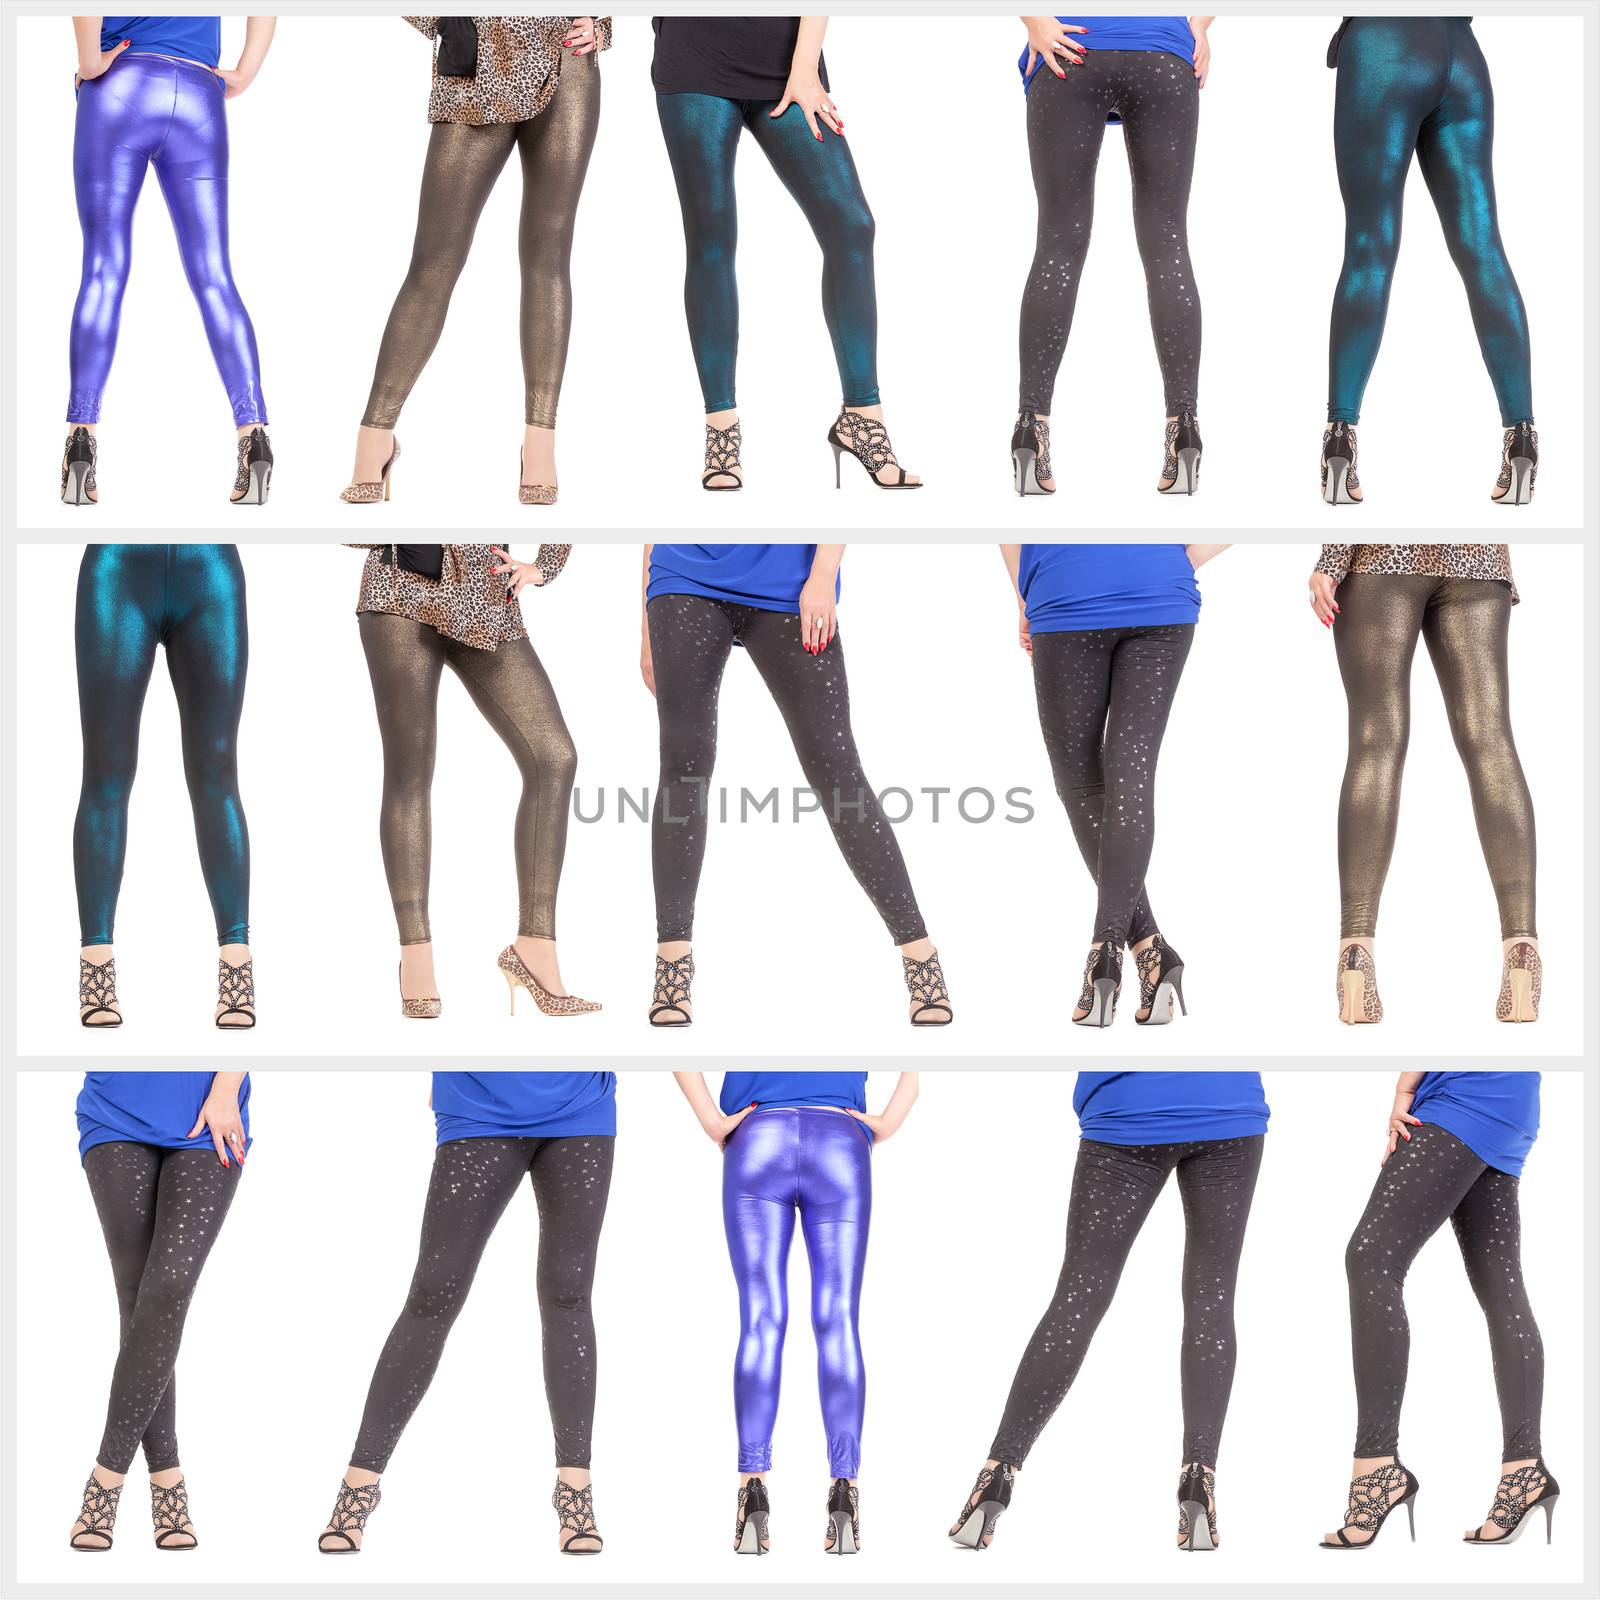 Collage woman's sexy legs and buttocks clad in shimmering leggin by Discovod